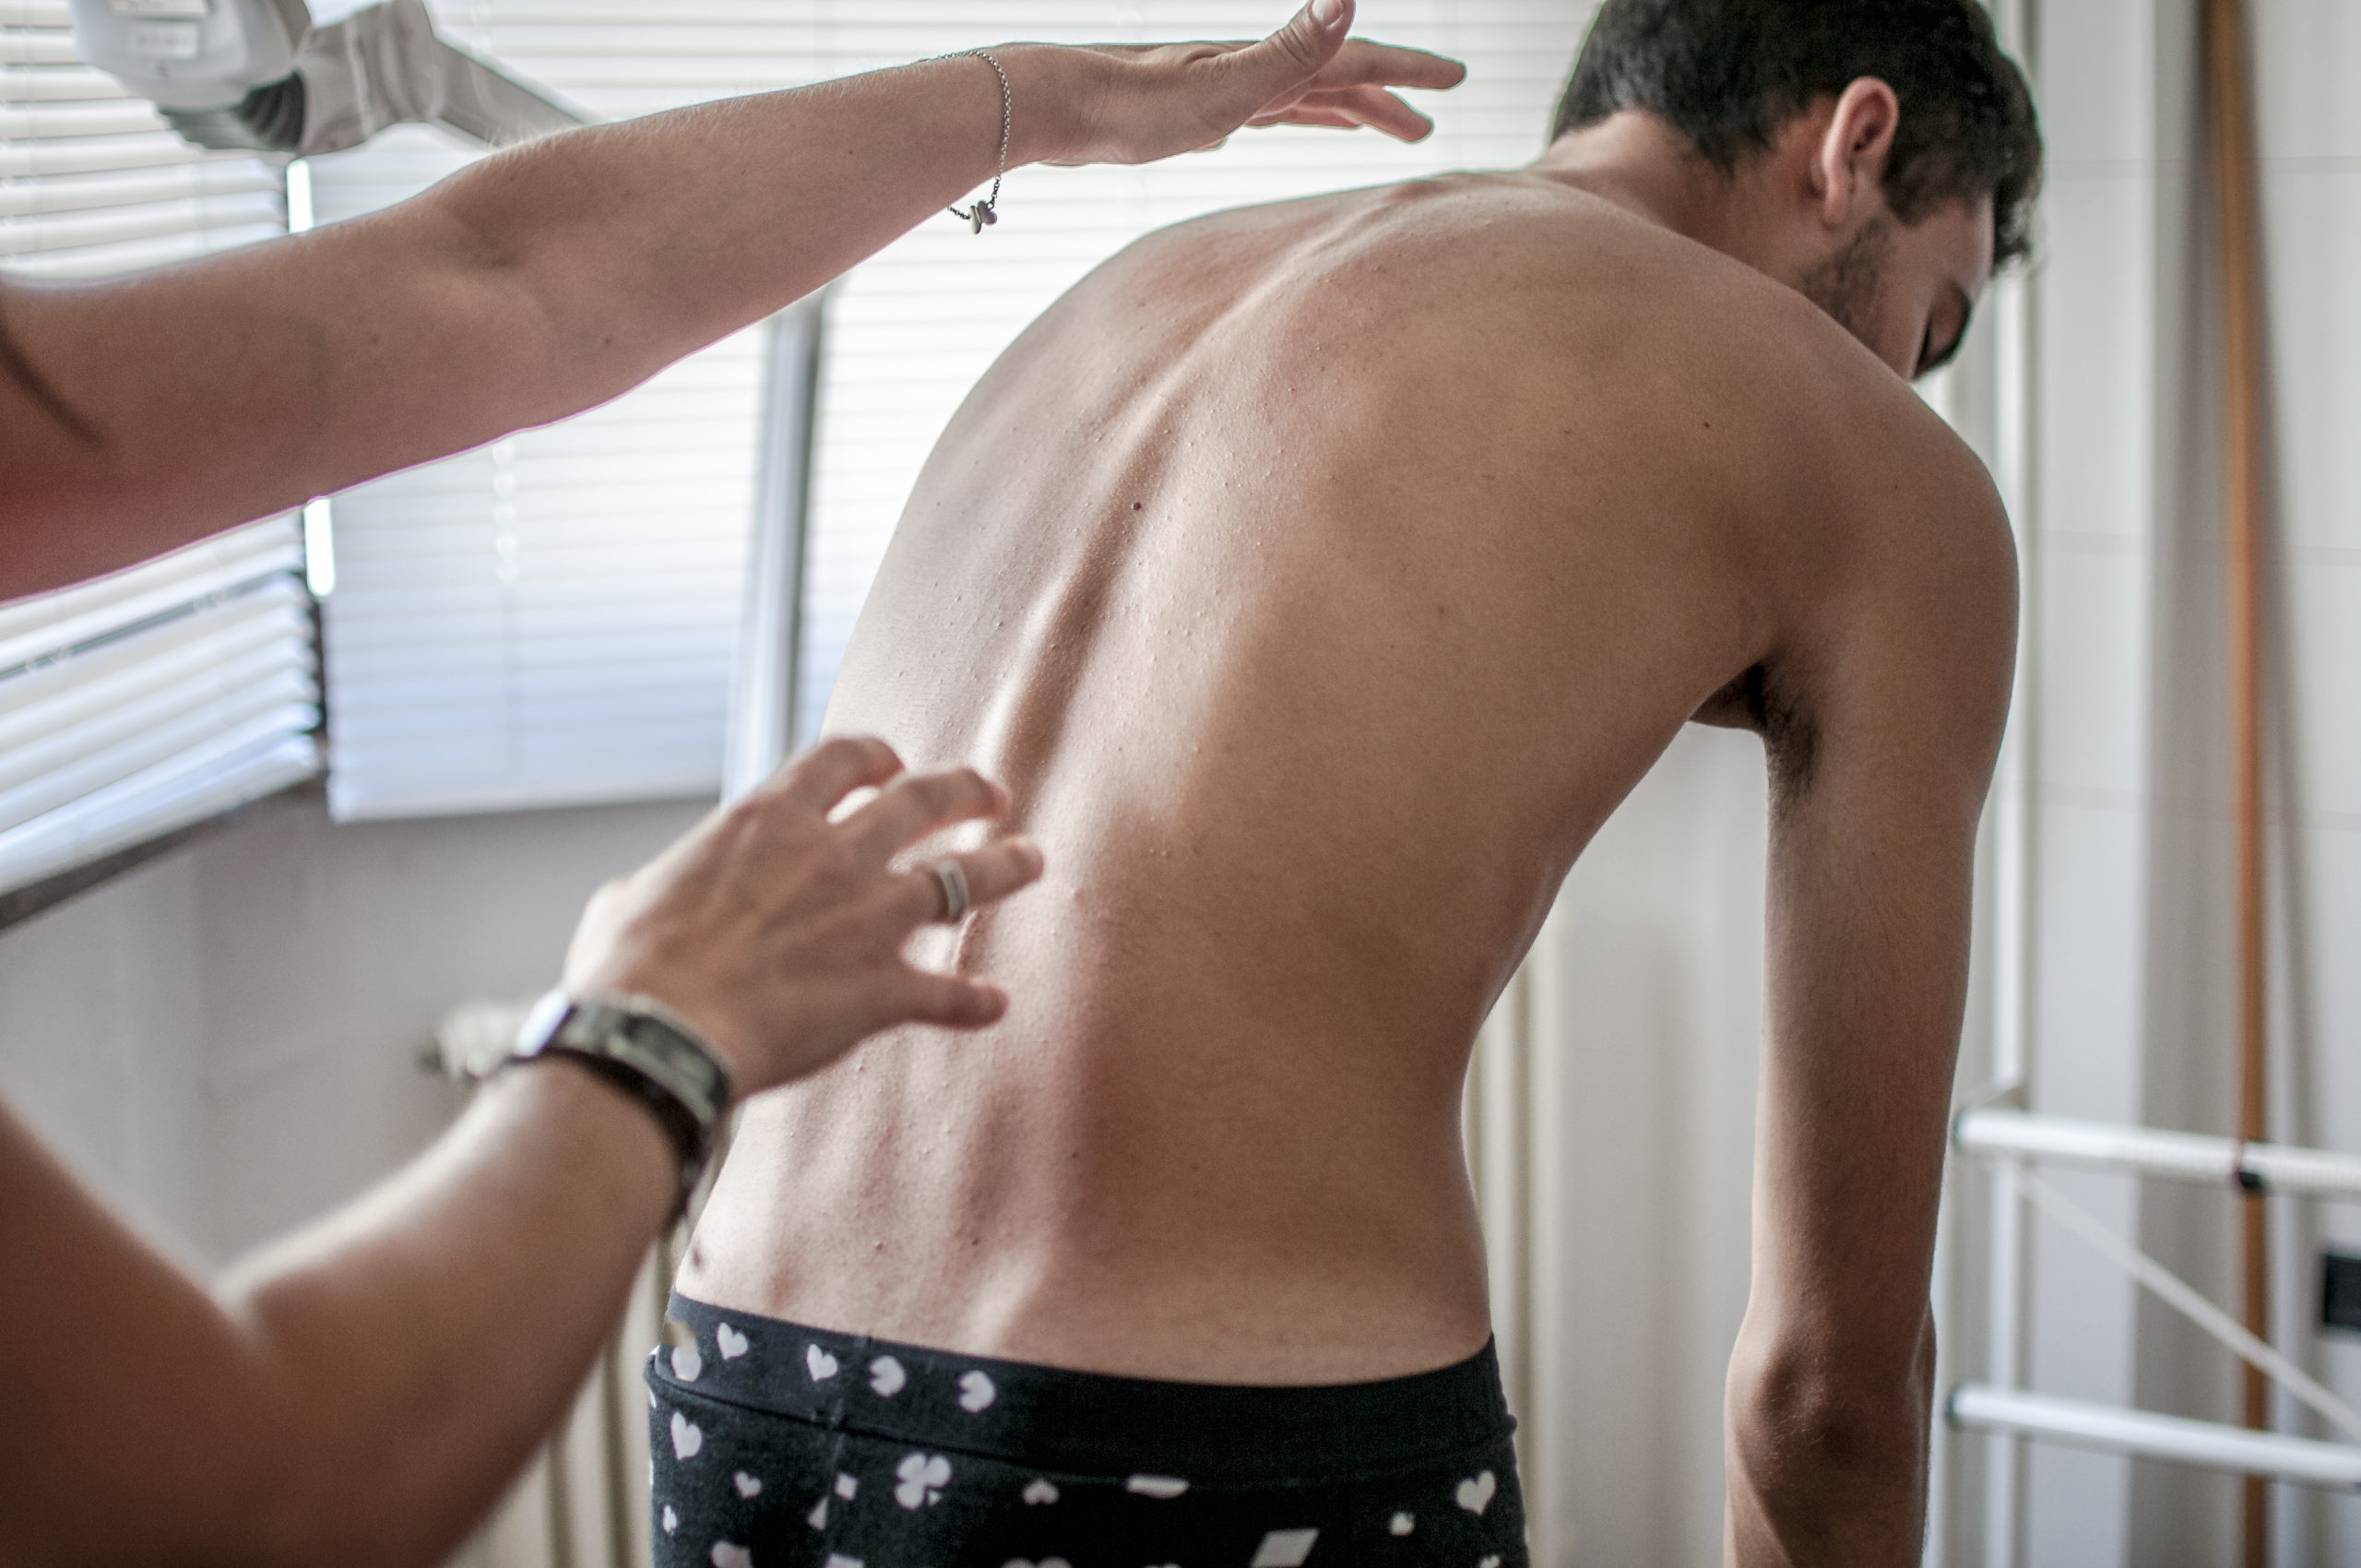 A physiotherapist check body growth of young man